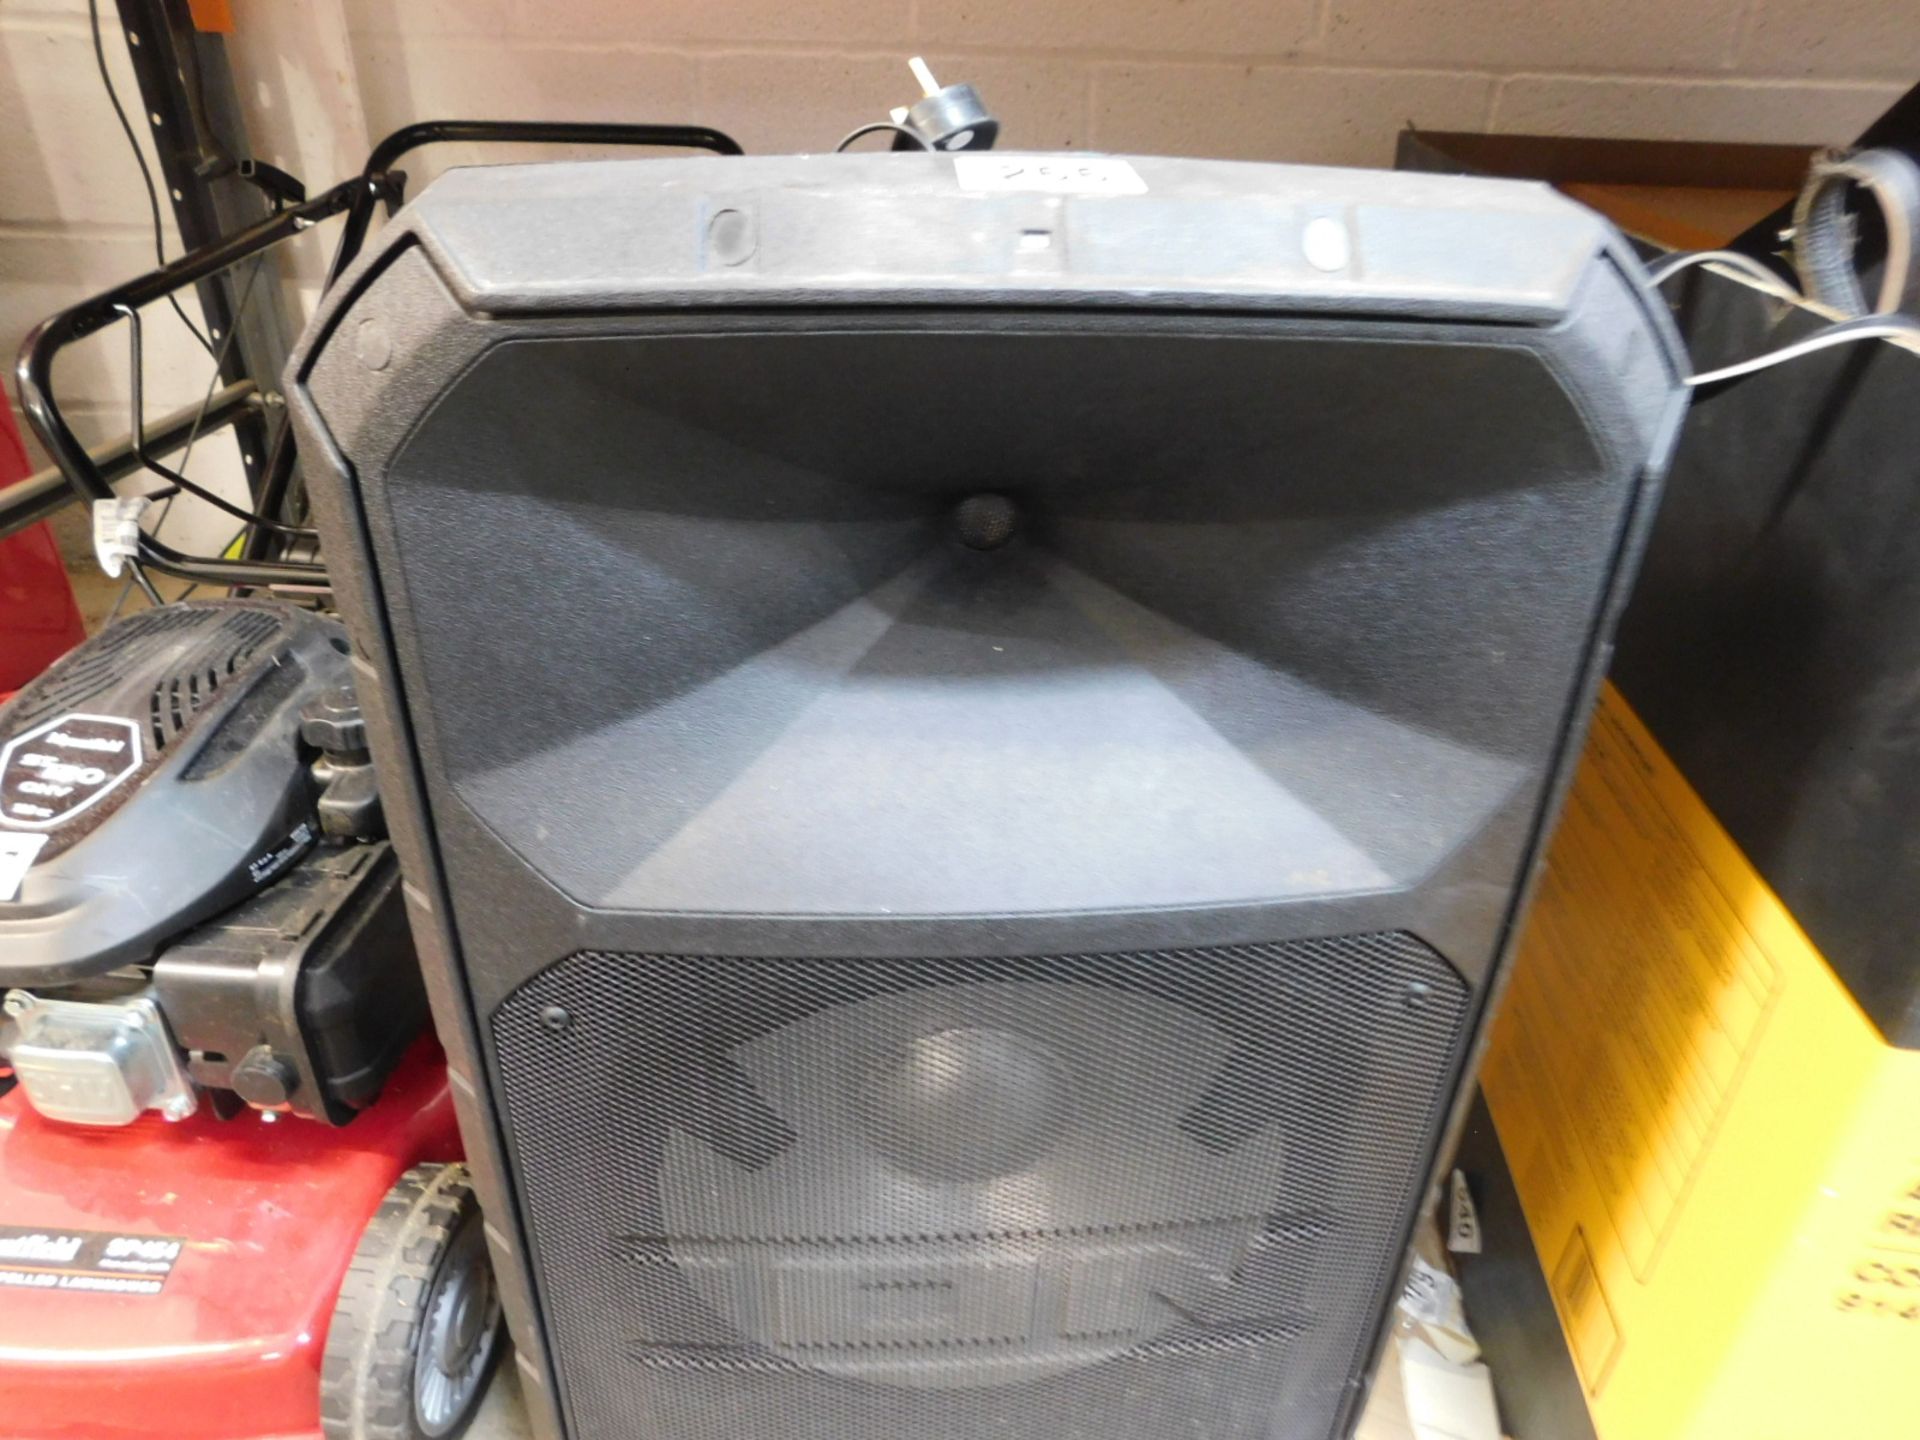 1 ION TOTAL PA MAX 500W BI-AMPLIFIED ALL-IN-ONE SPEAKER SYSTEM RRP Â£299